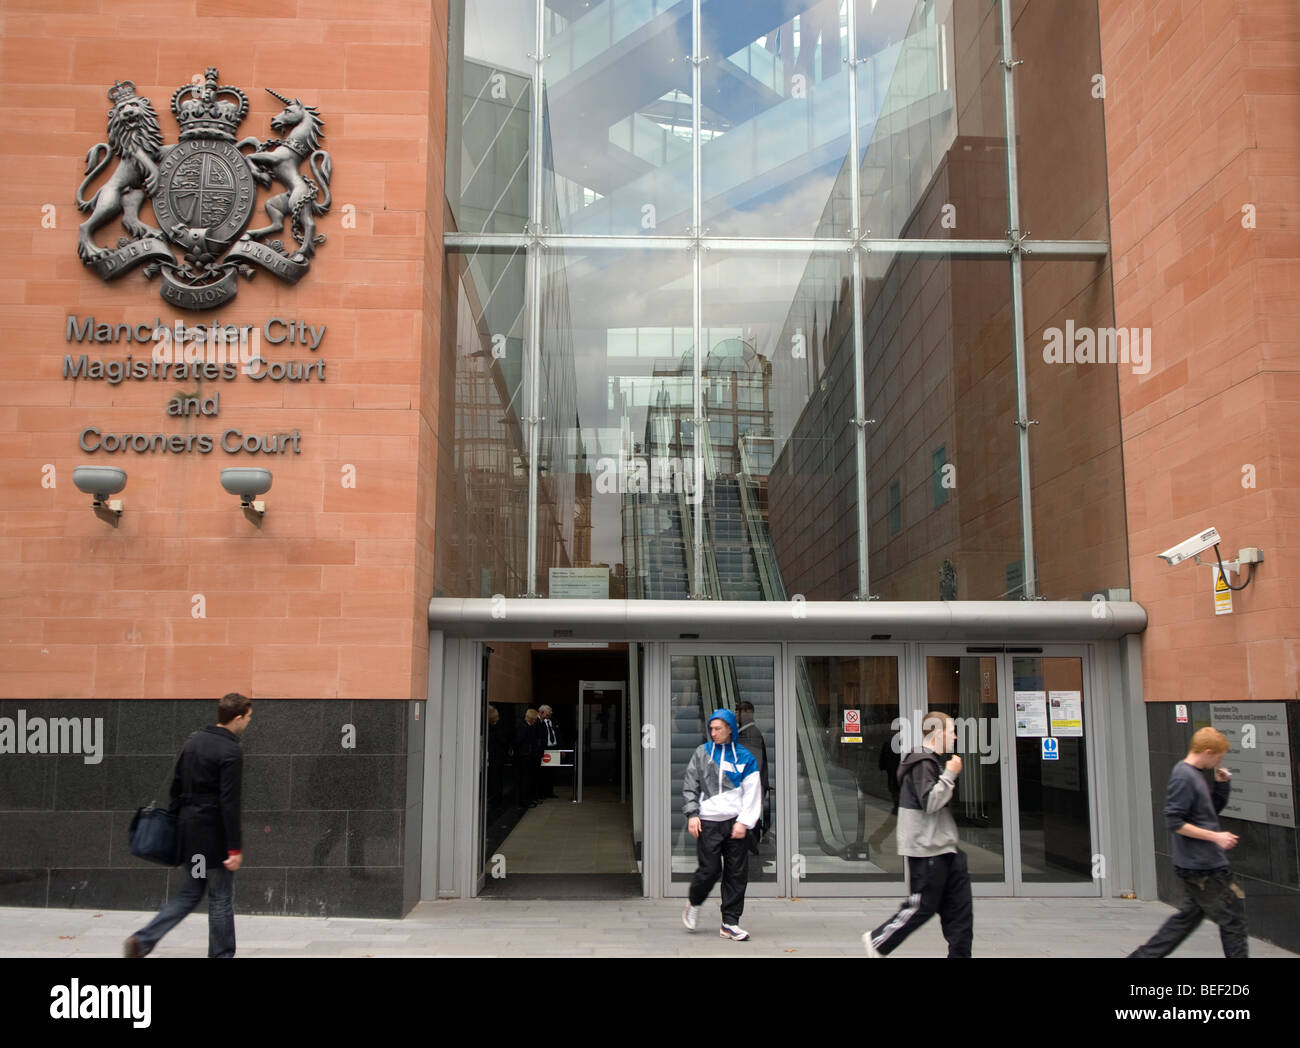 Manchester City Magistrates and Coroners Court, Manchester, UK. Stock Photo